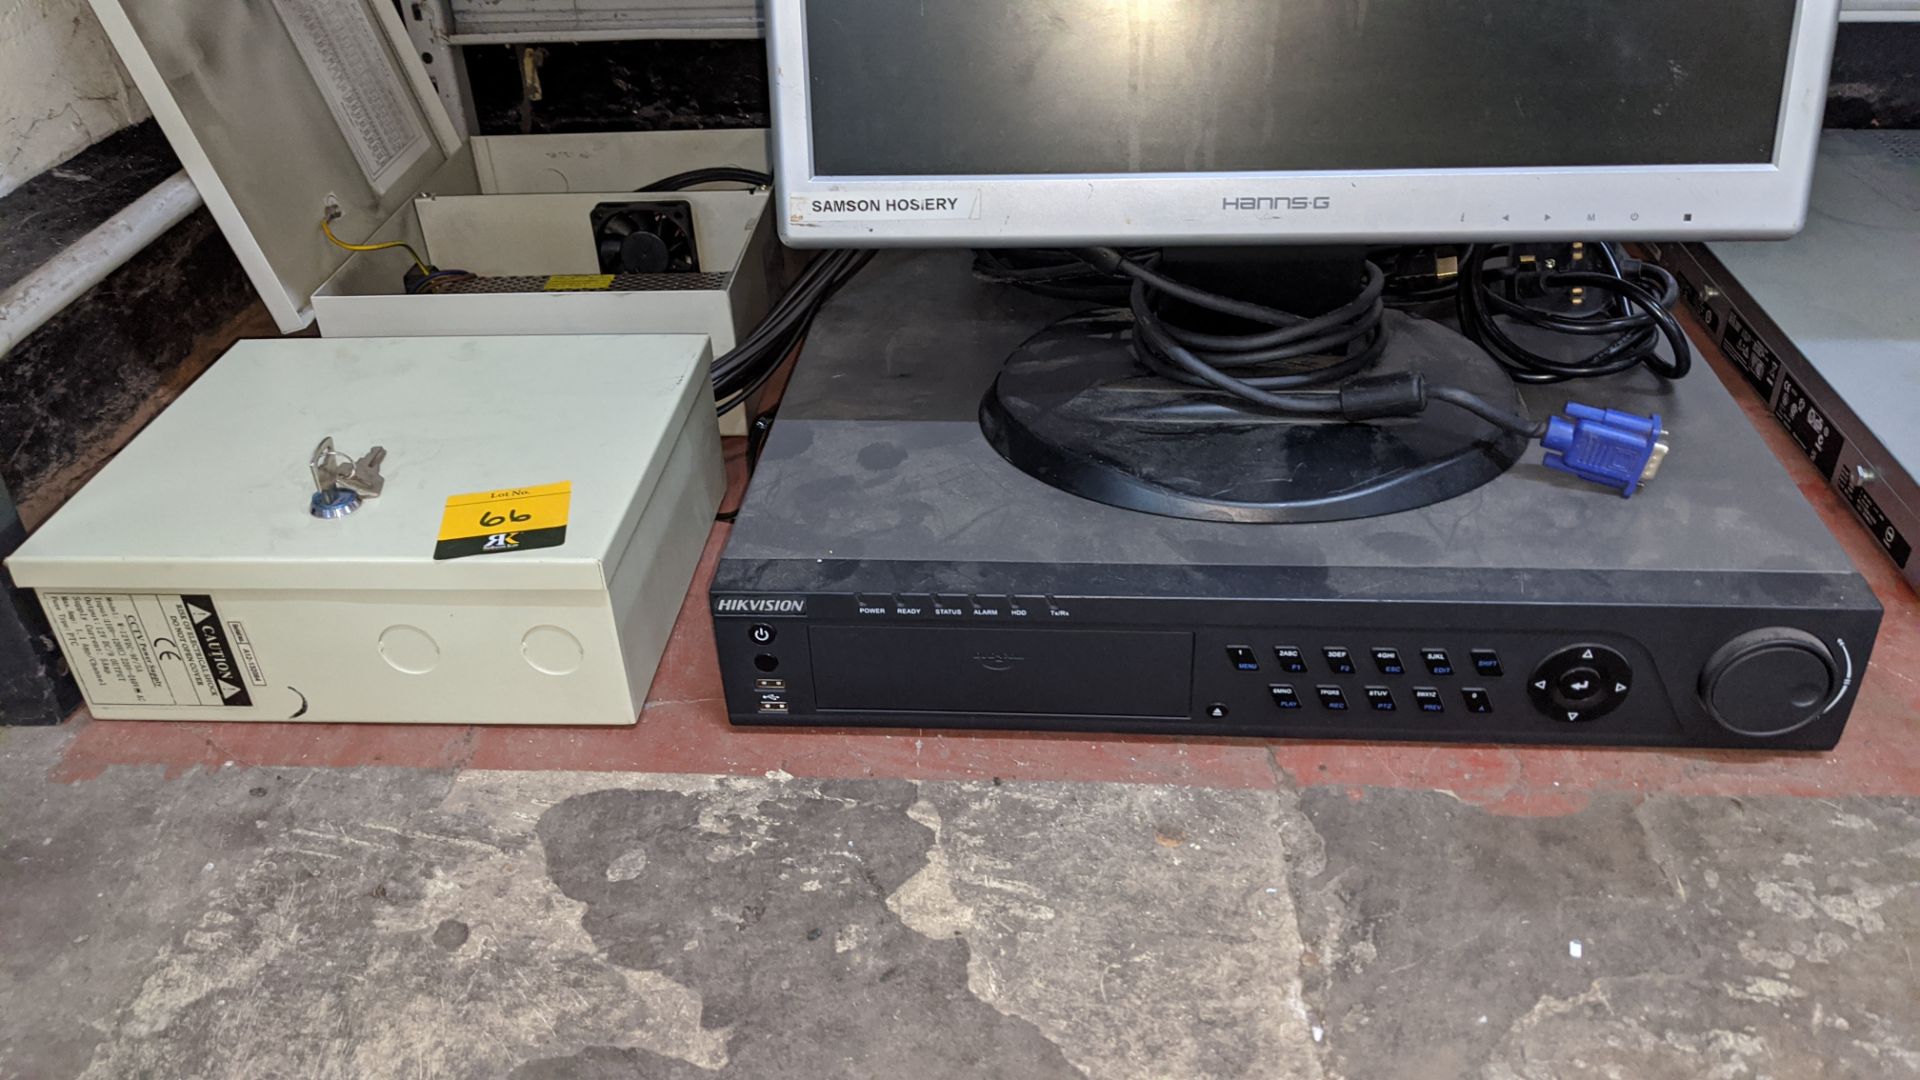 CCTV equipment comprising HIK Vision DVR with monitor plus 2 off lockable power supplies for use - Image 3 of 5